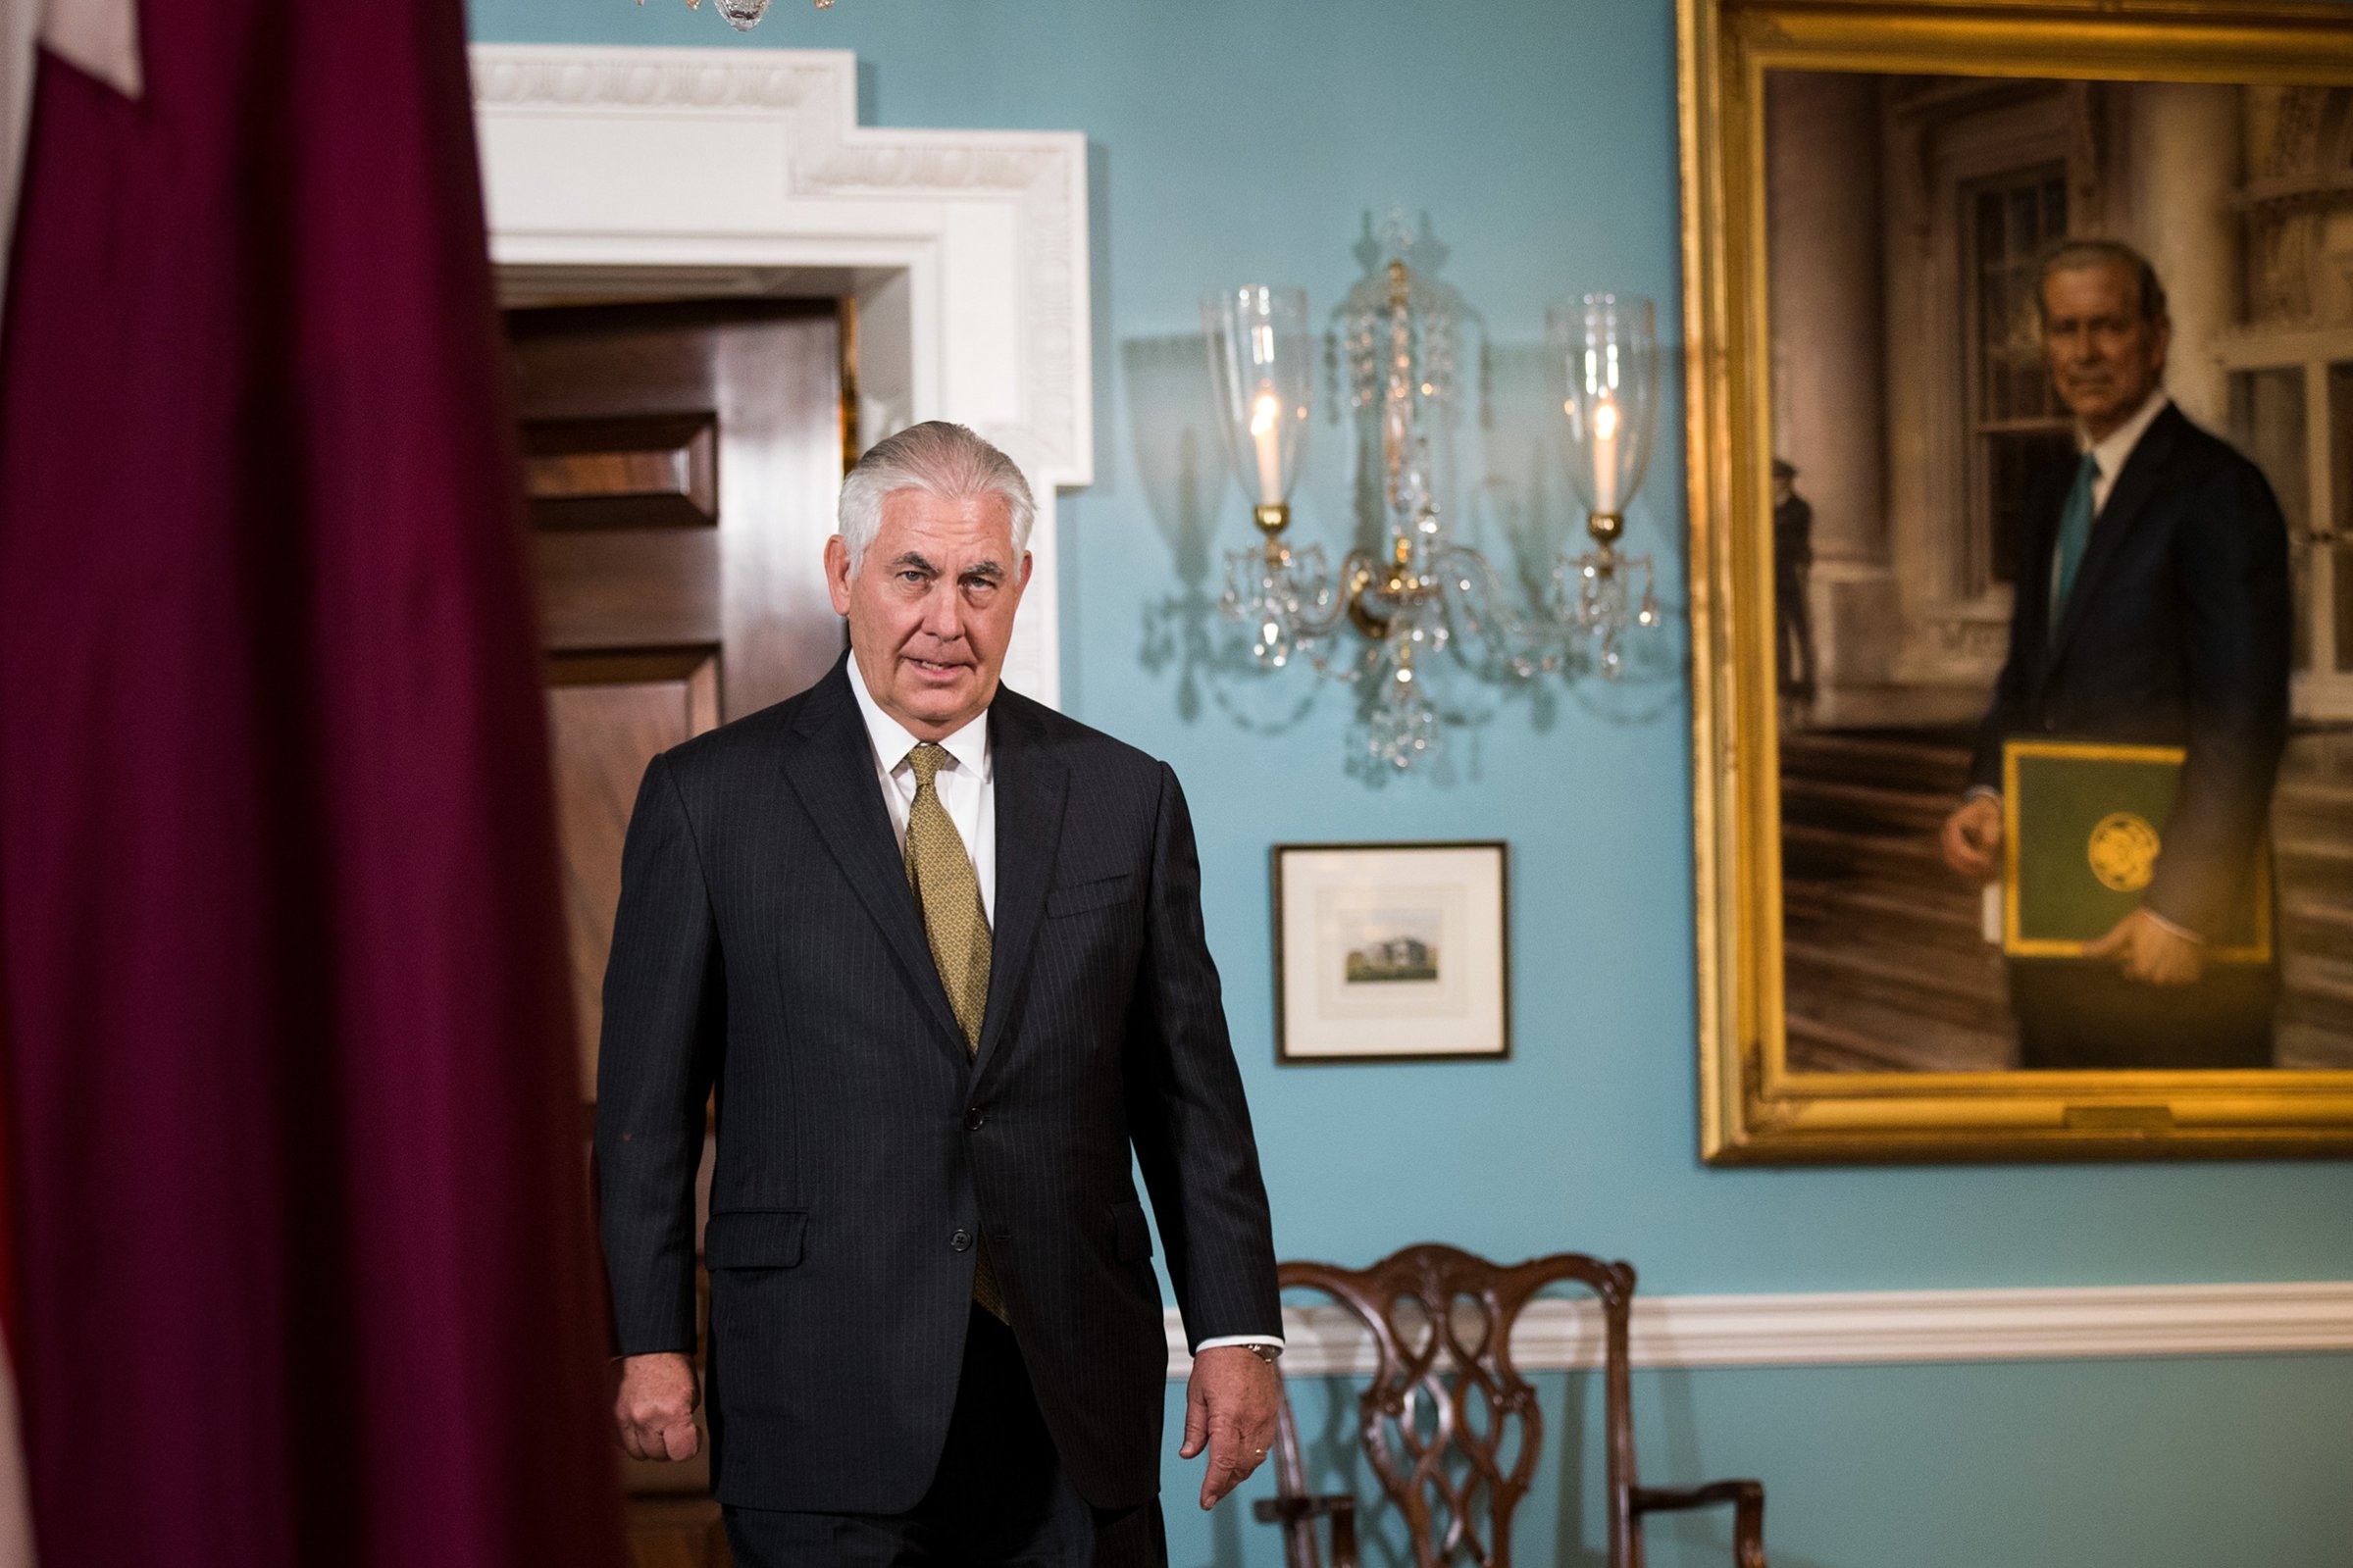 Secretary of State Rex Tillerson exits a brief media availability before his meeting with Qatari Foreign Minister Sheikh Mohammed Bin Abdulrahman Al Thani at the State Department, July 26, 2017 in Washington. When prompted by a reporter's question, Tillerson said 'I'm not going anywhere' and that he will stay on as Secretary of State 'as long as the president lets me.'